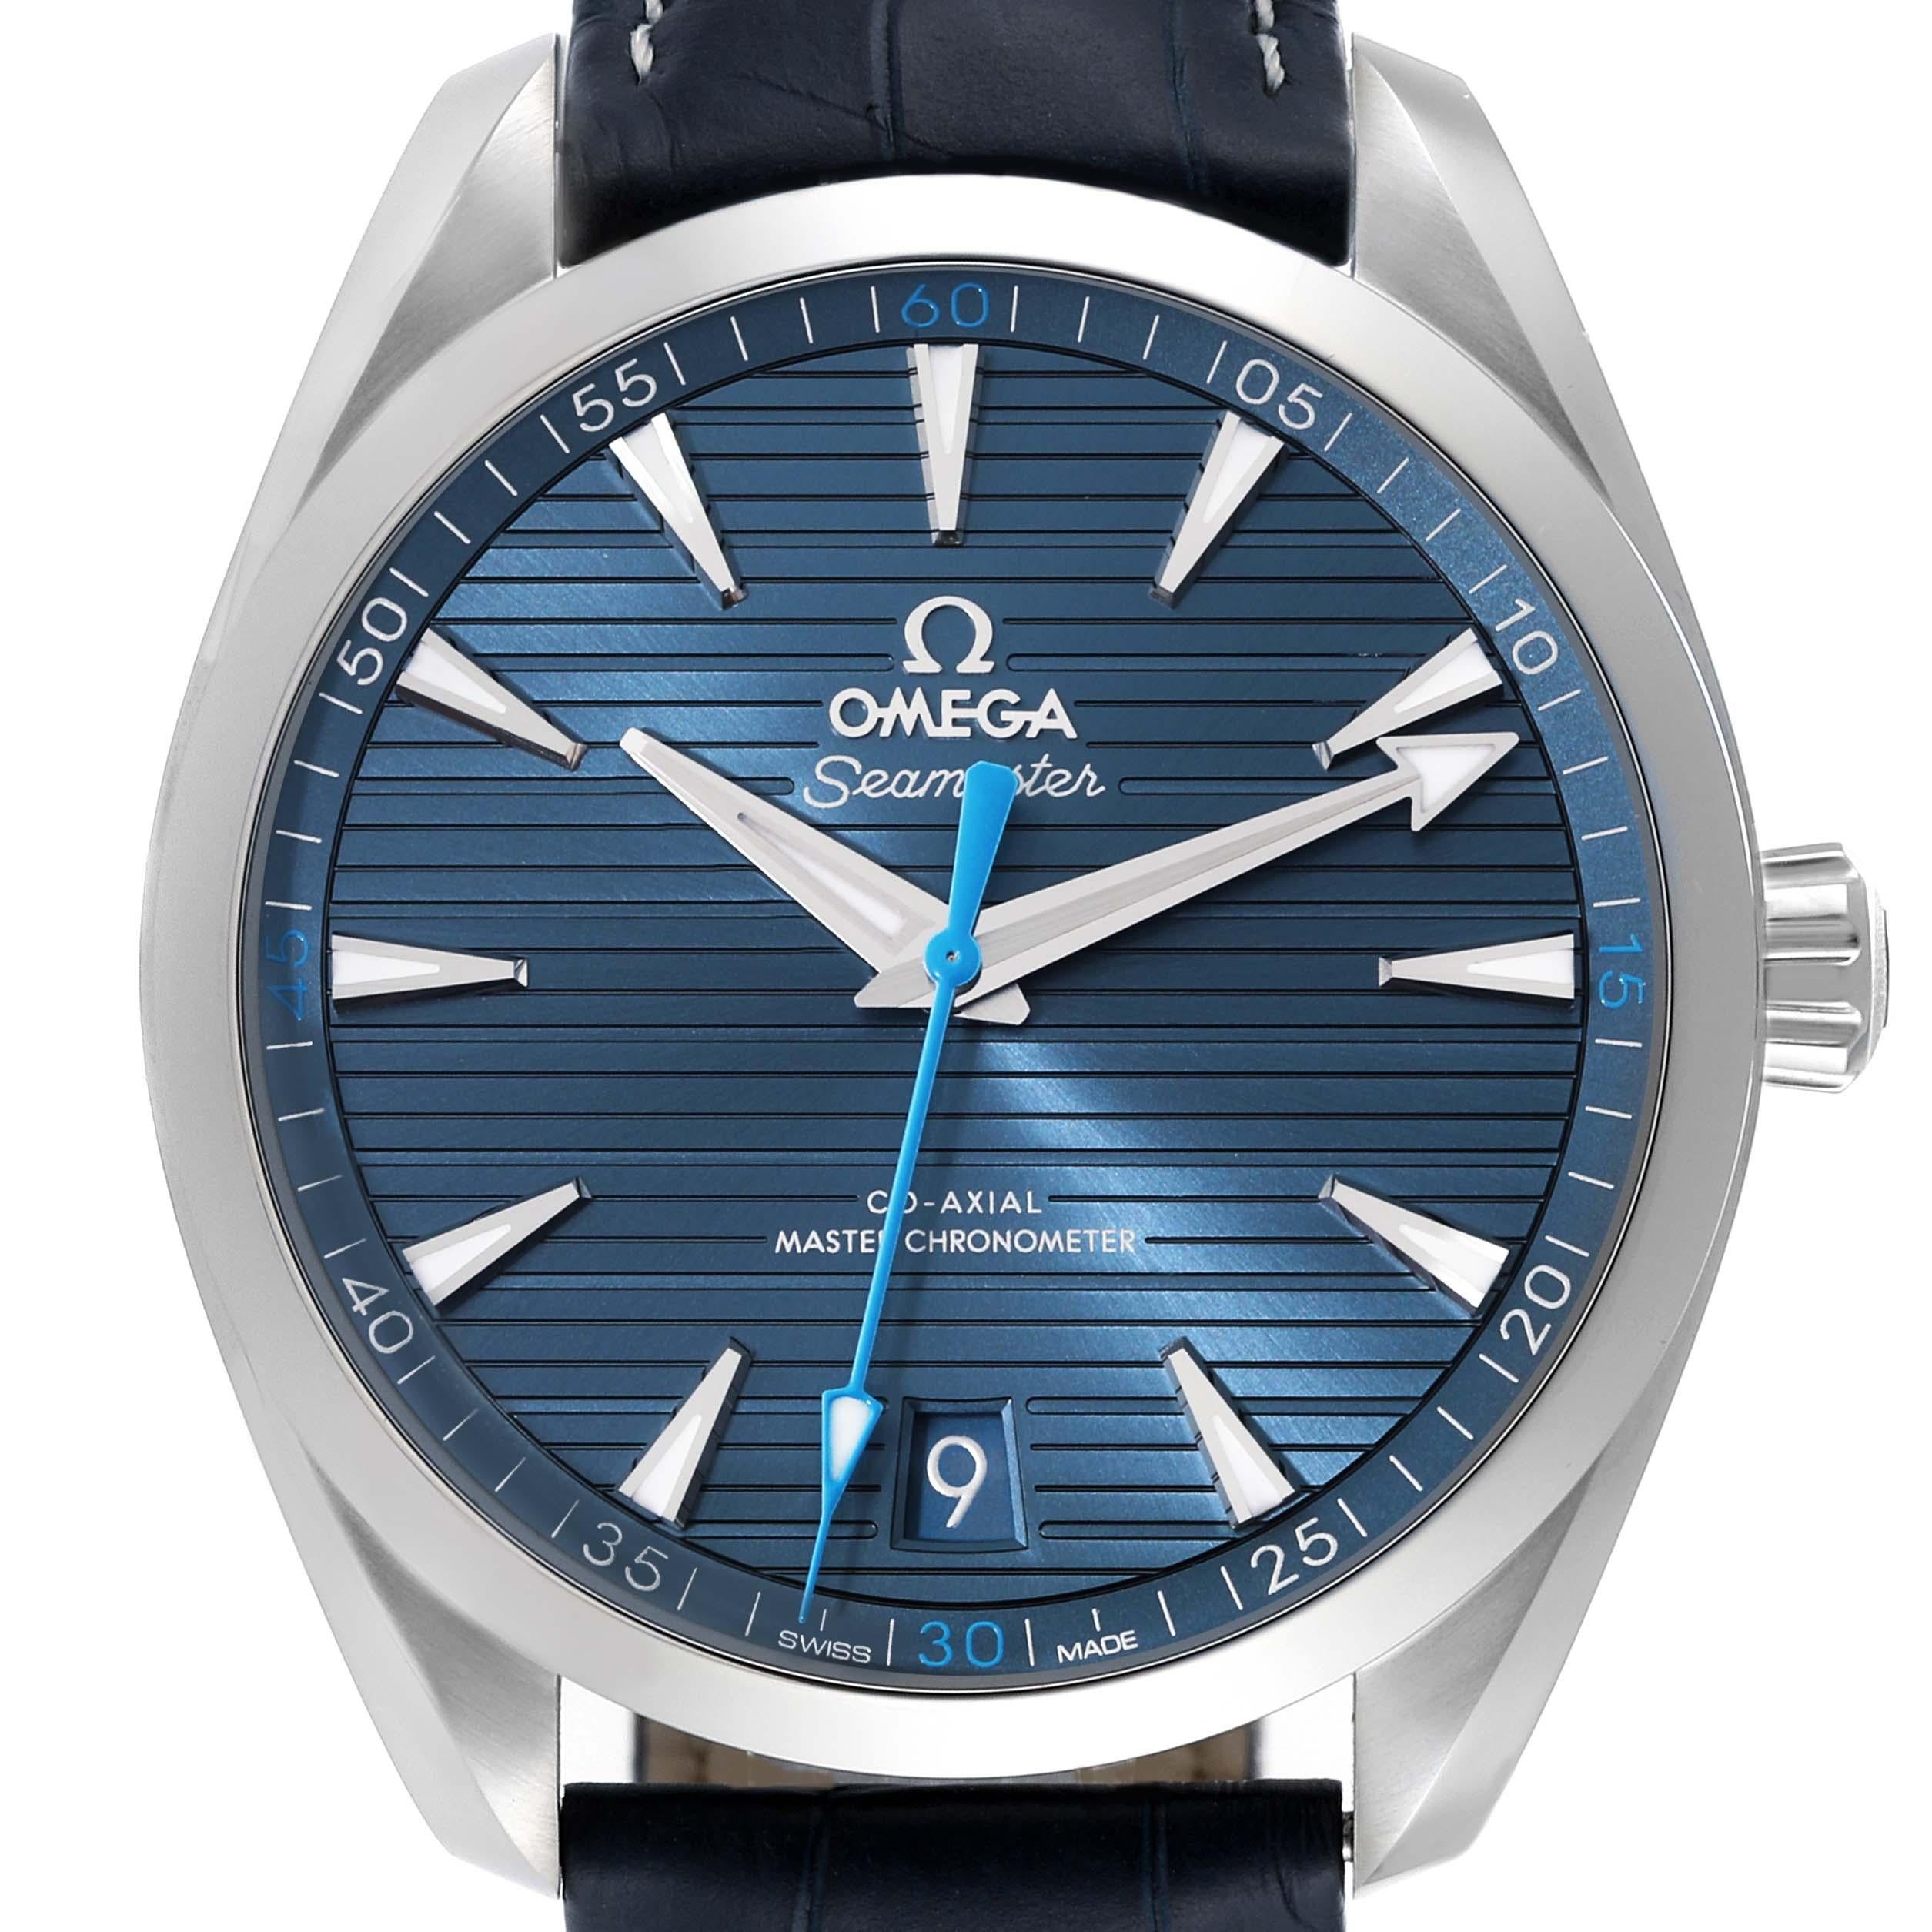 Omega Seamaster Aqua Terra Steel Mens Watch 220.13.41.21.03.002 Box Card. Automatic self-winding movement. Stainless steel round case 41.0 mm in diameter. Case thickness 13.2 mm. Exhibition transparent sapphire crystal caseback. Stainless steel